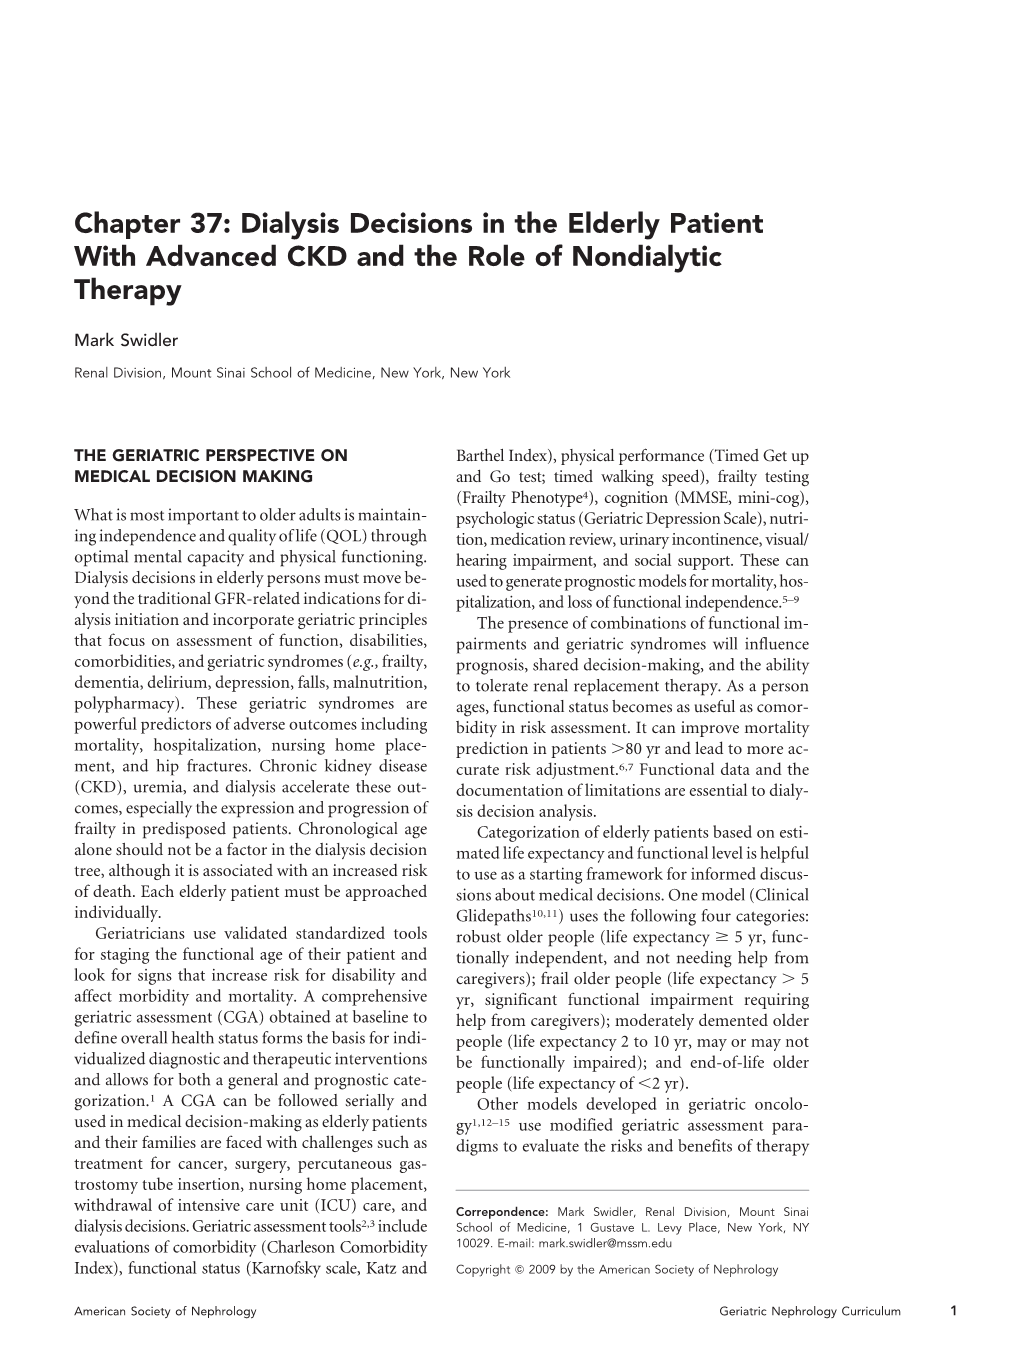 Chapter 37: Dialysis Decisions in the Elderly Patient with Advanced CKD and the Role of Nondialytic Therapy